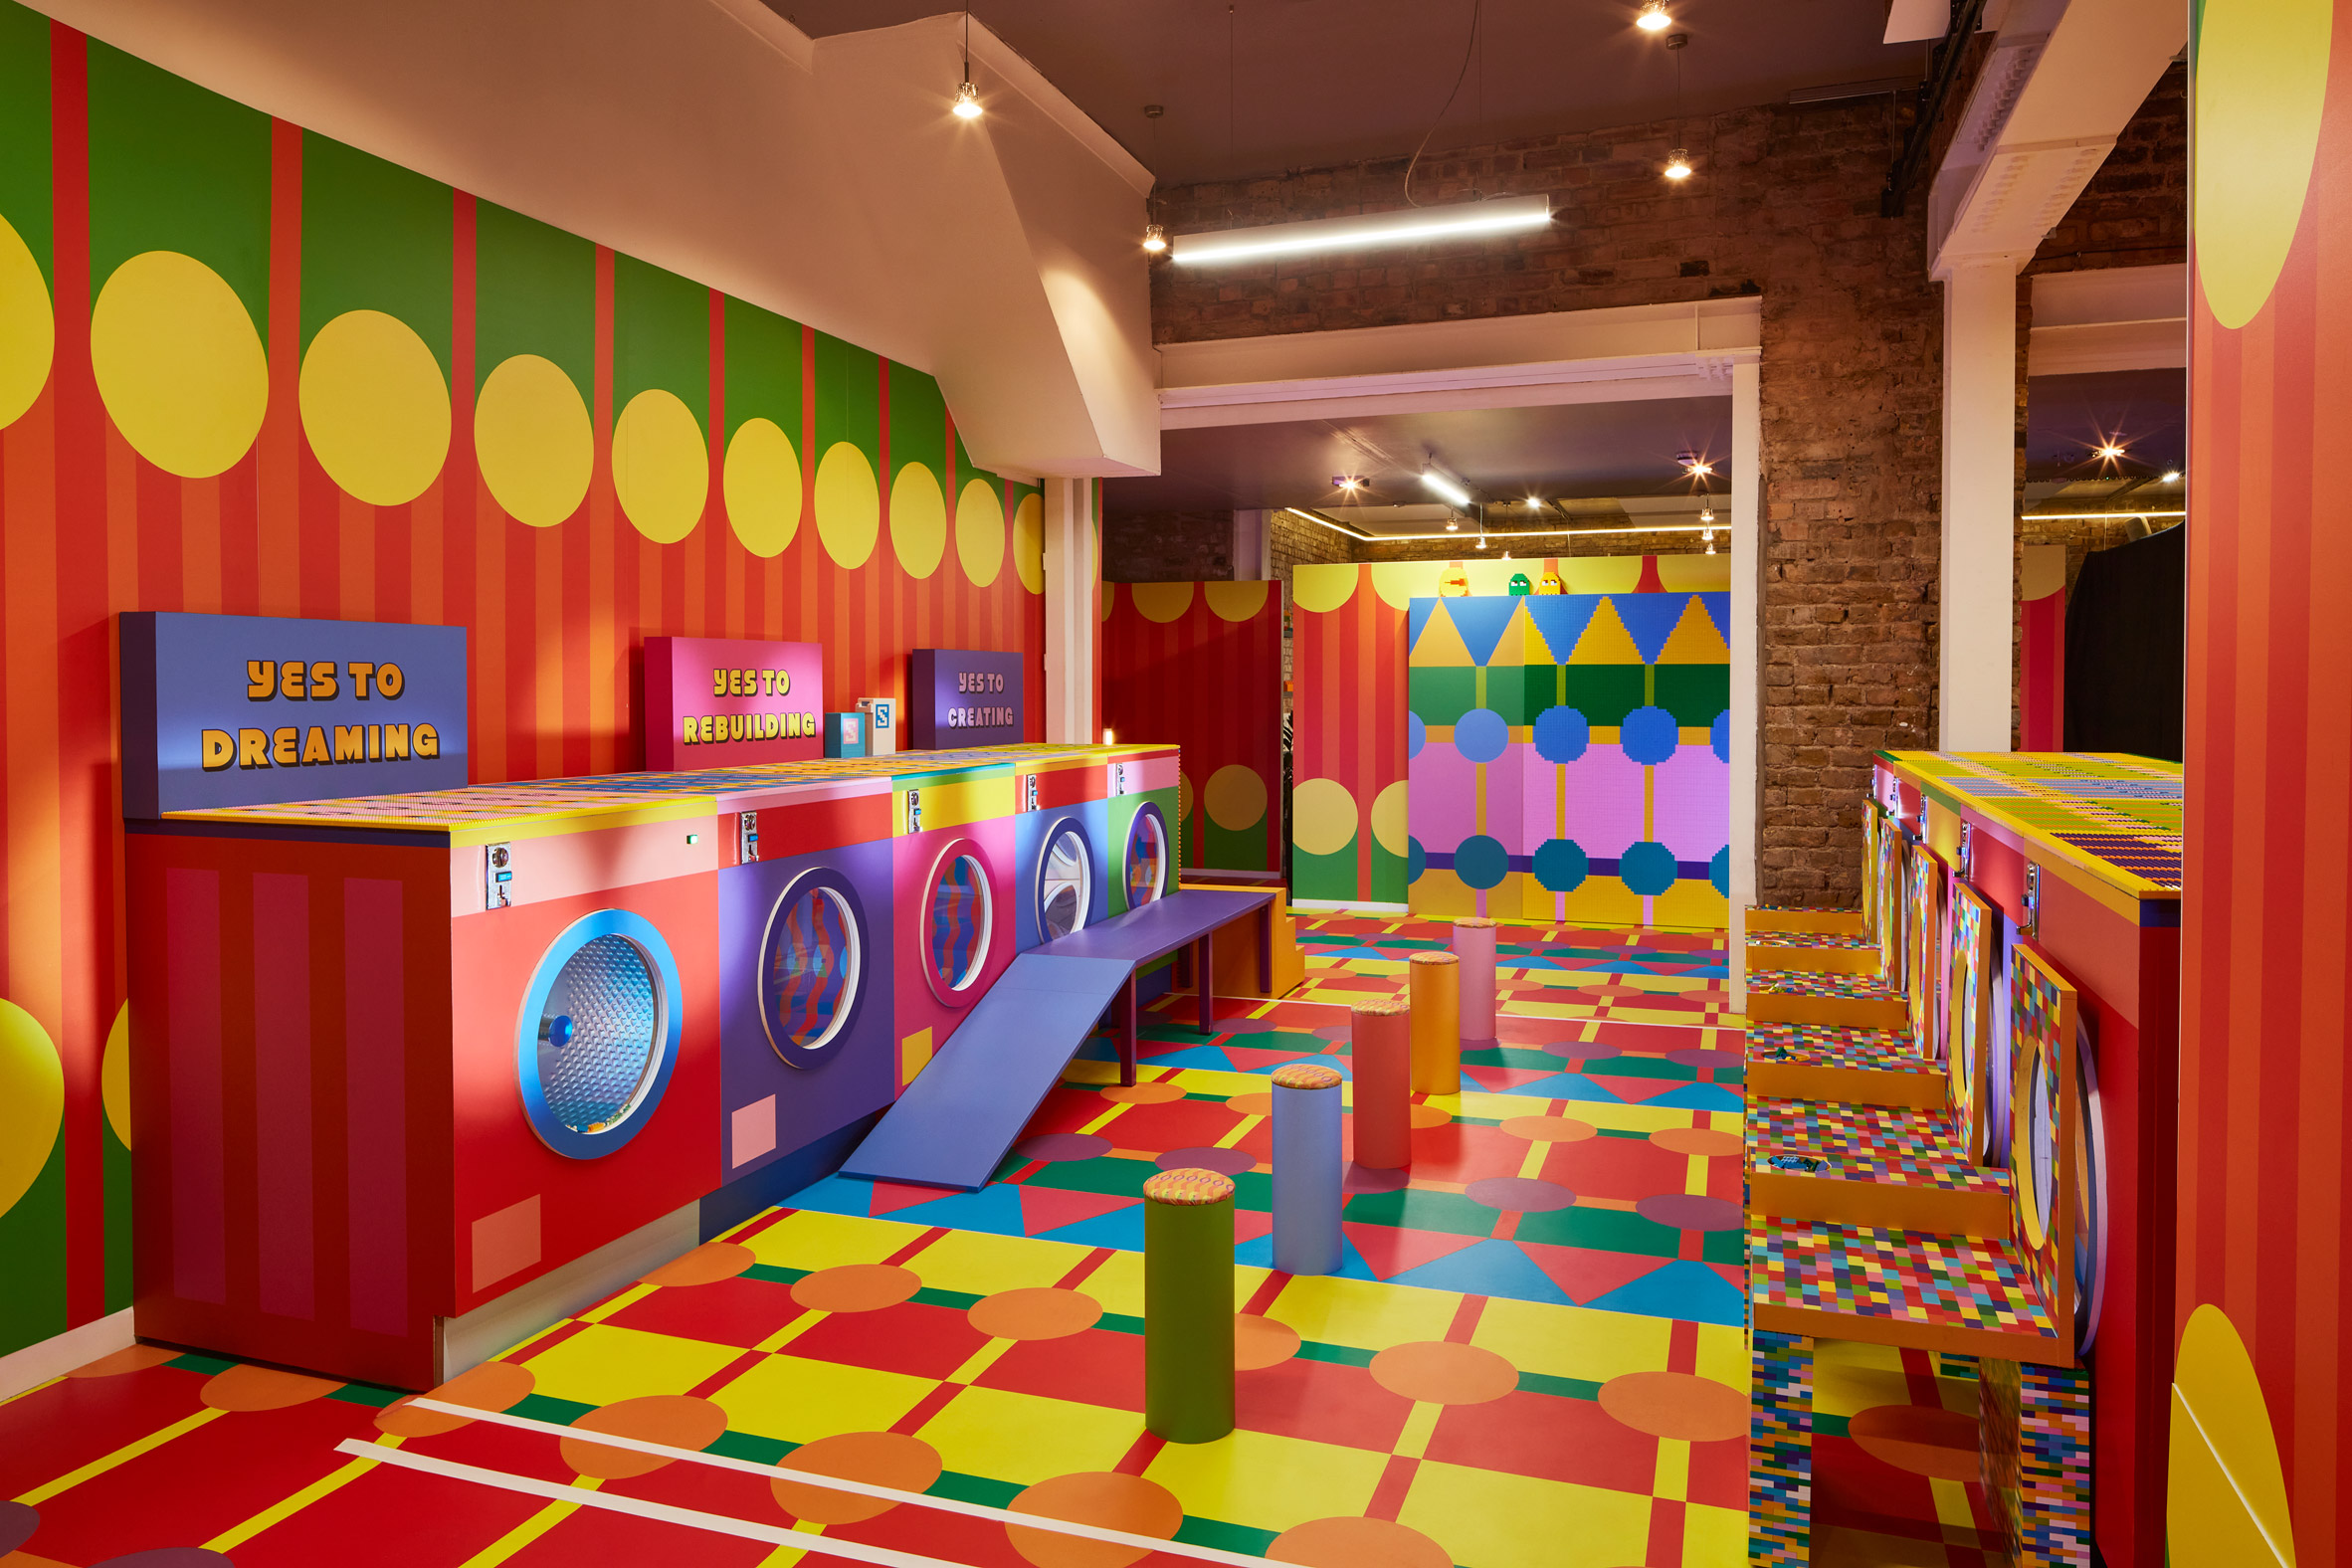 Laundrette of Dreams decorated in bold colours and geometric patterns